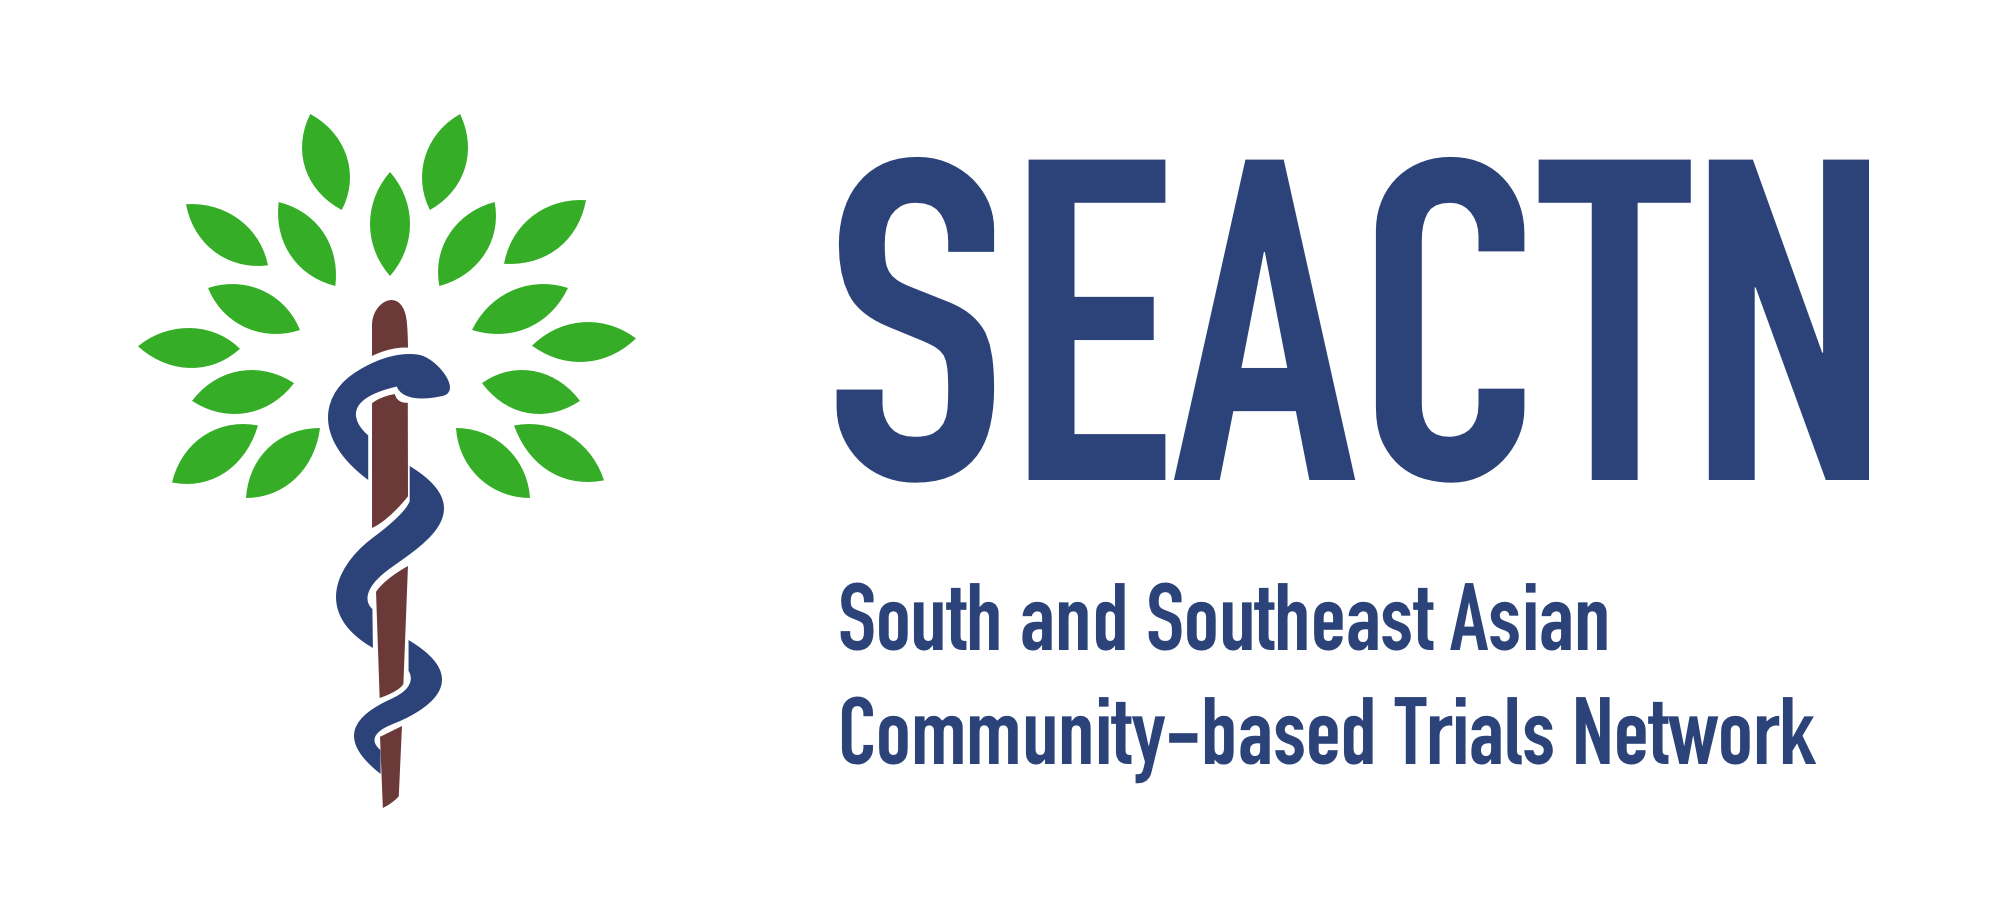 South and Southeast Asian Community-based Trials Network